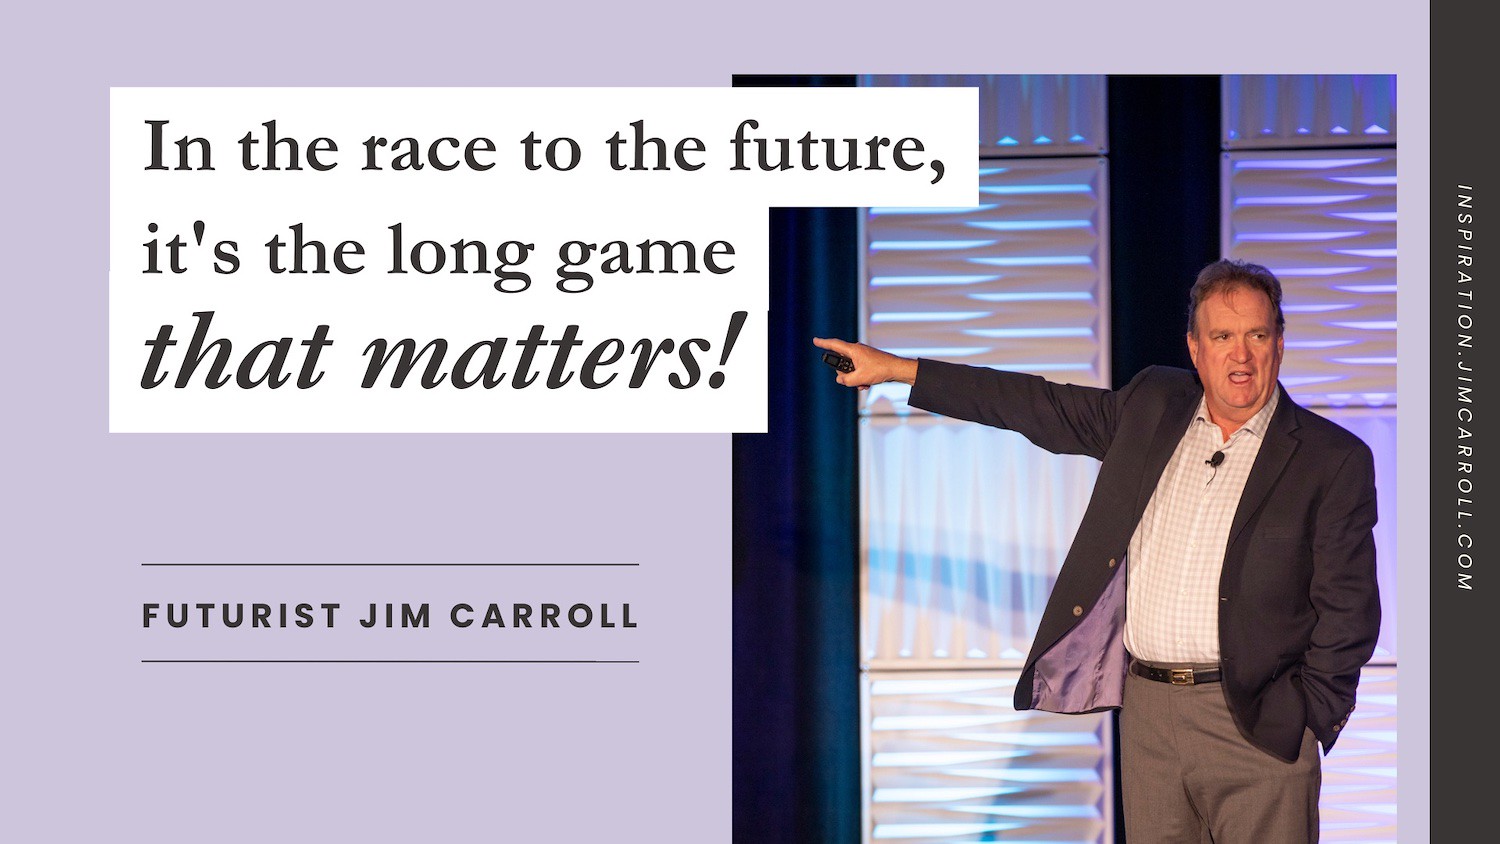 "In the race to the future, it's the long game that matters!" - Futurist Jim Carroll